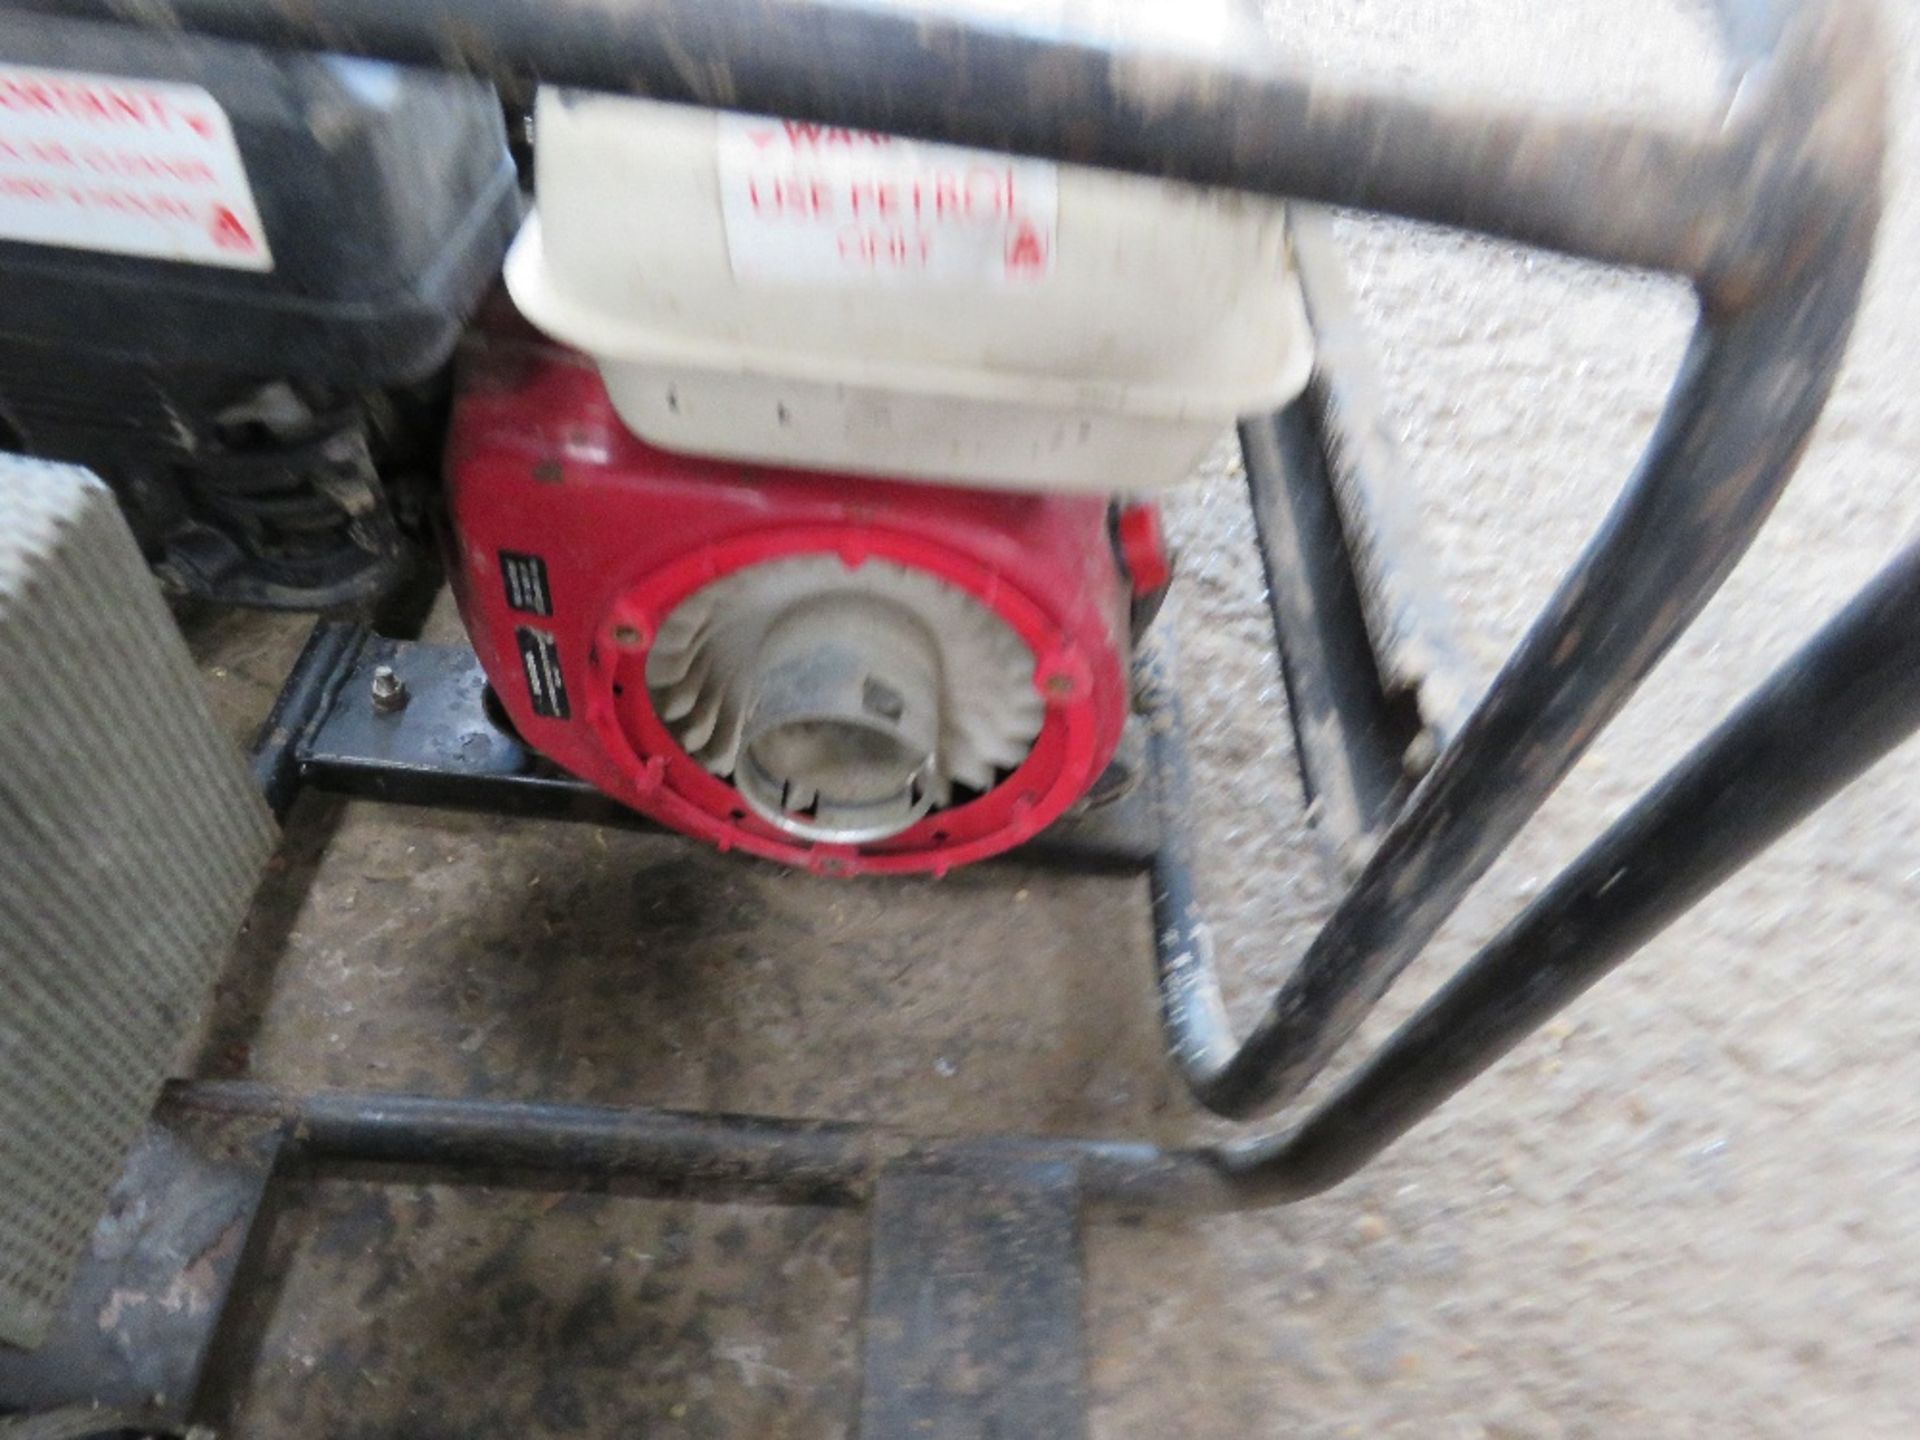 PETROL ENGINED GENERATOR, CONDITION UNKNOWN. DIRECT FROM UTILITIES CONTRACTOR. - Image 2 of 3